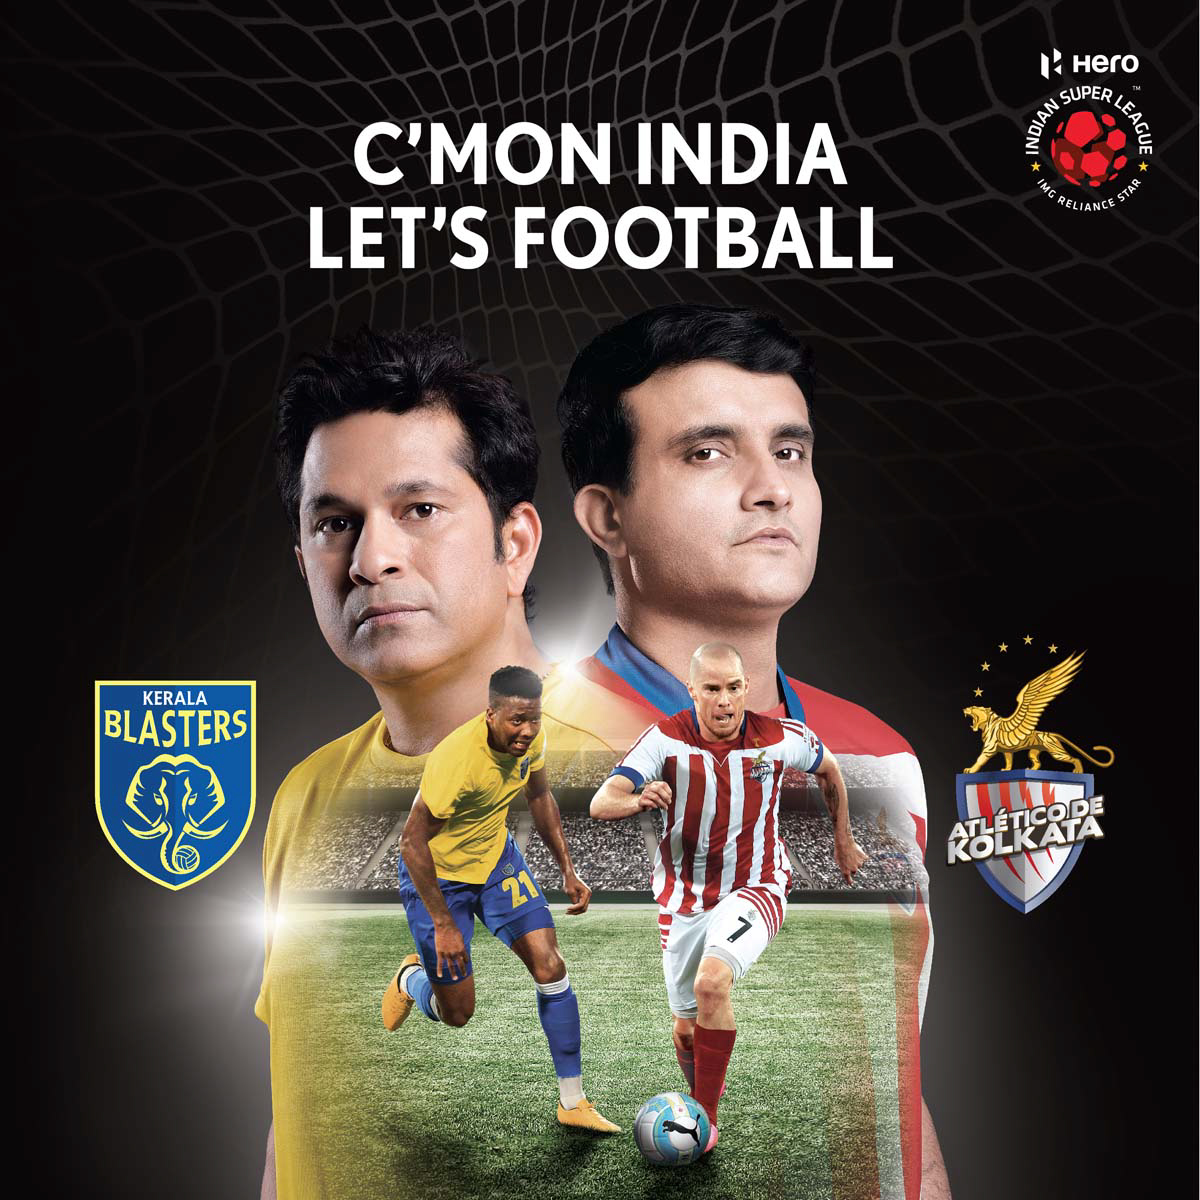 Indian Super League, Football League,Sport Photography, Crickerter Photoshoot, Shooting with Celebrity, Sport Photographer,Football, Sports, Passionate, Commissioned Photography, Best Advertising Photographer by Vikram Bawa, Mumbai, India